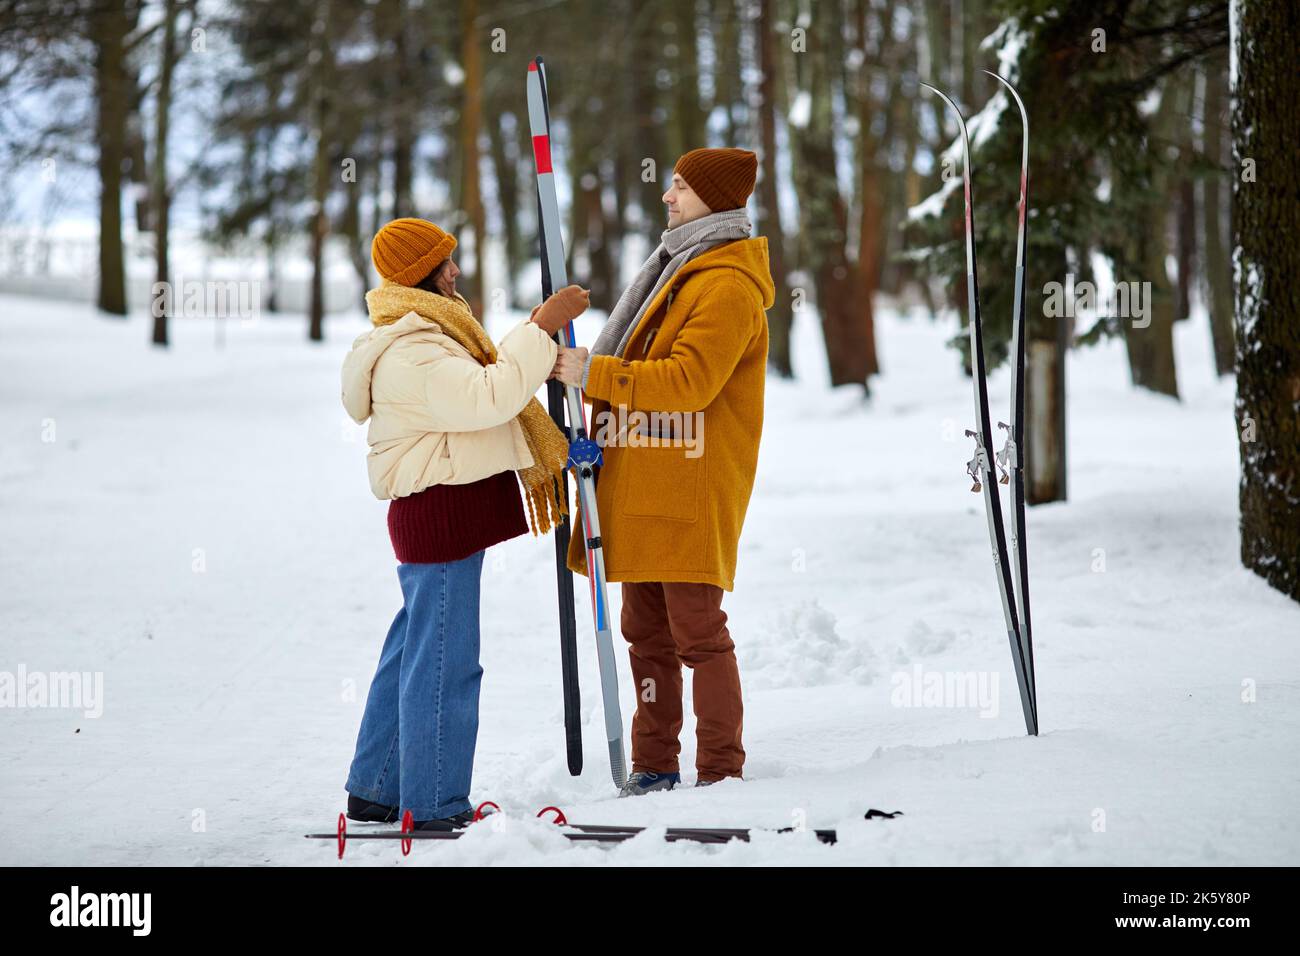 Full length portrait of young couple skiing in winter forest while enjoying holiday vacation, copy space Stock Photo